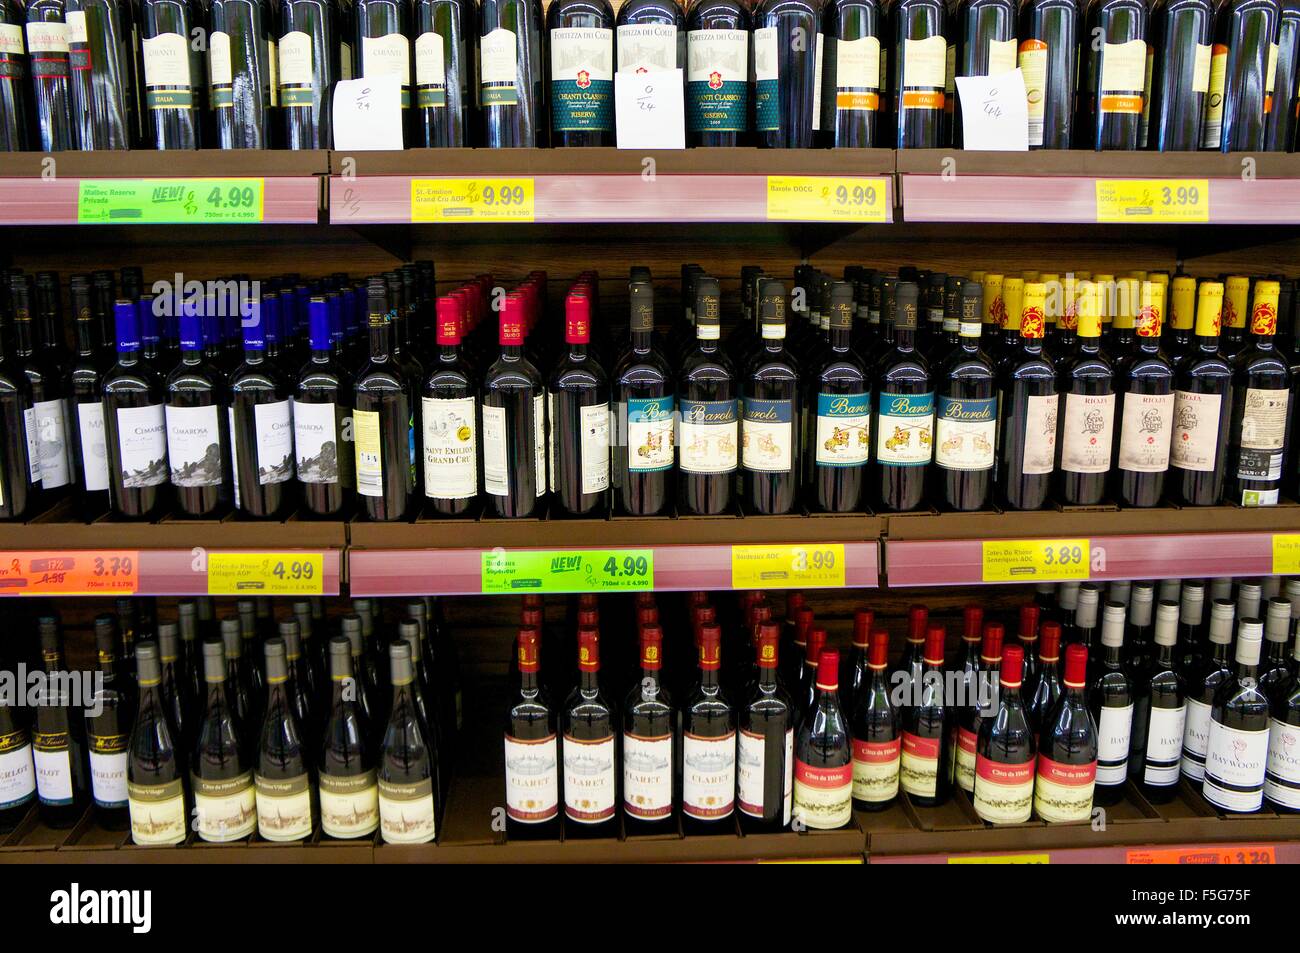 Supermarket wine shelves showing a selection of bottles of wine with price labels. Stock Photo